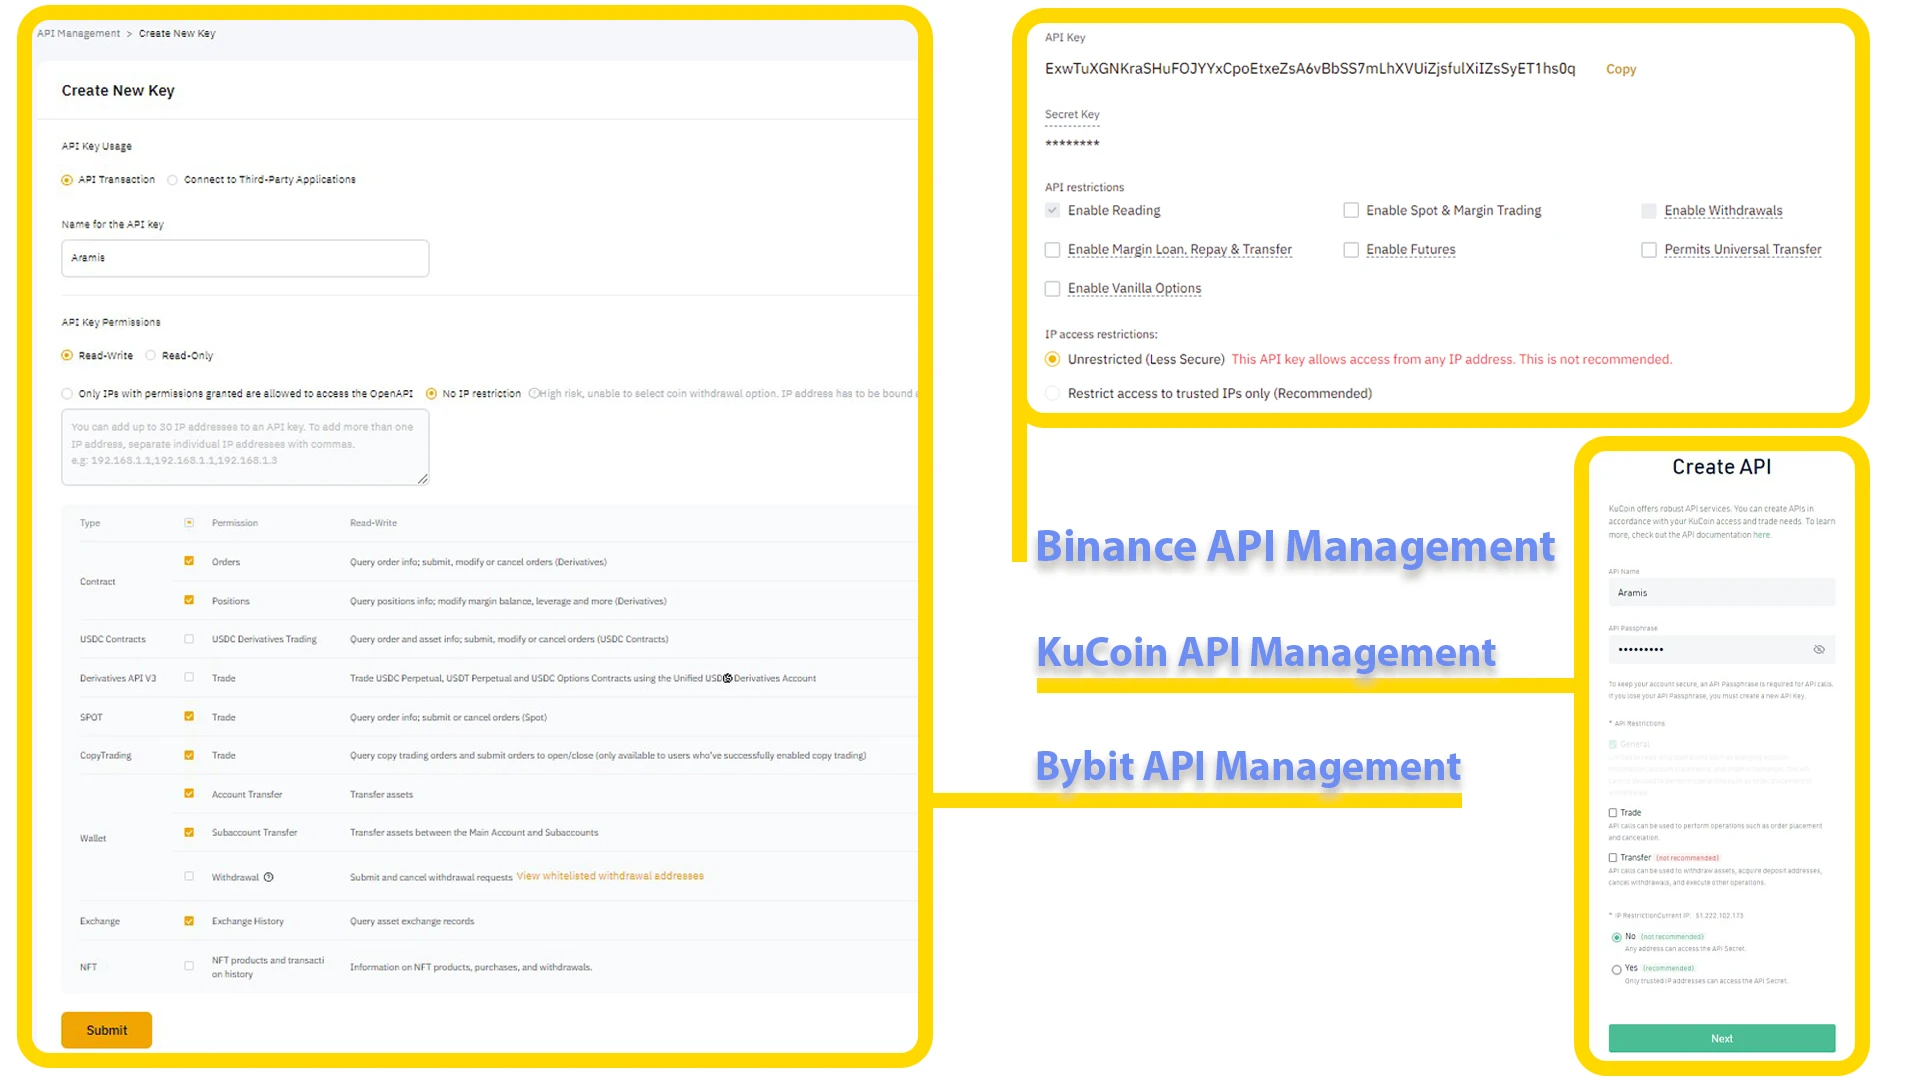 Comparing Bybit, Binance and KuCoin API configuration sophistications together.